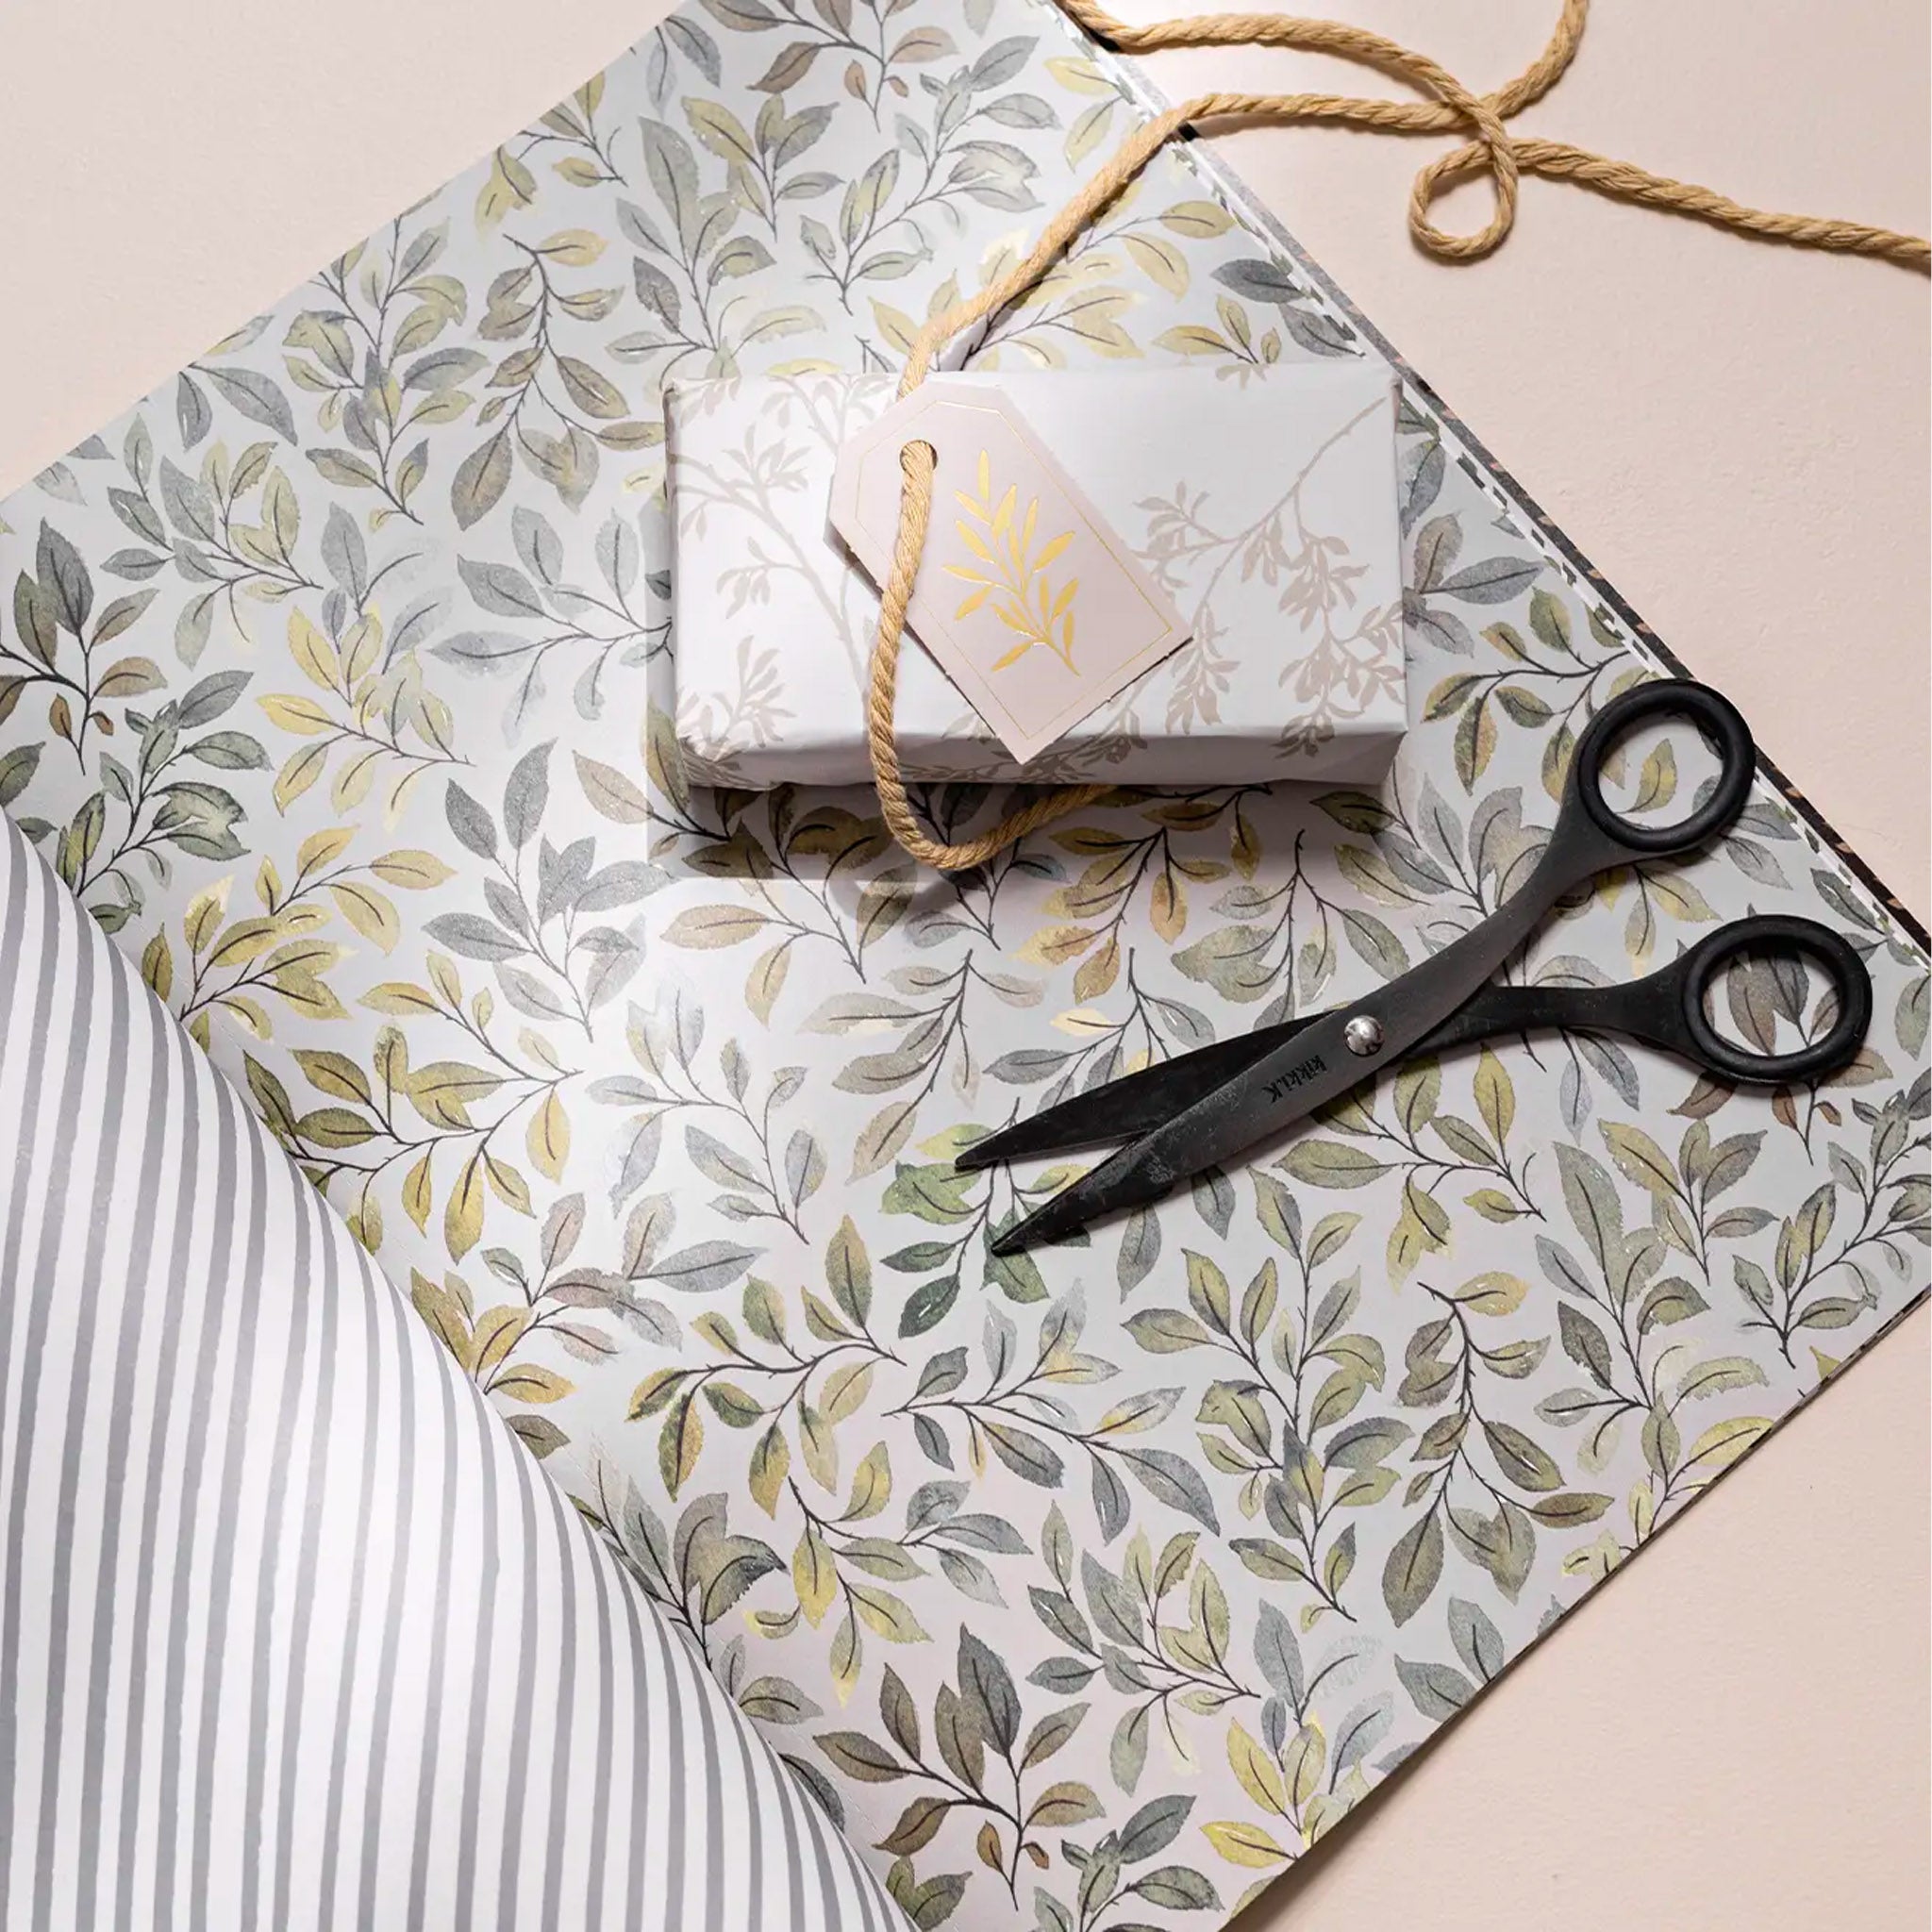 That's A Wrap! Wrapping Paper Book – Timberbloom